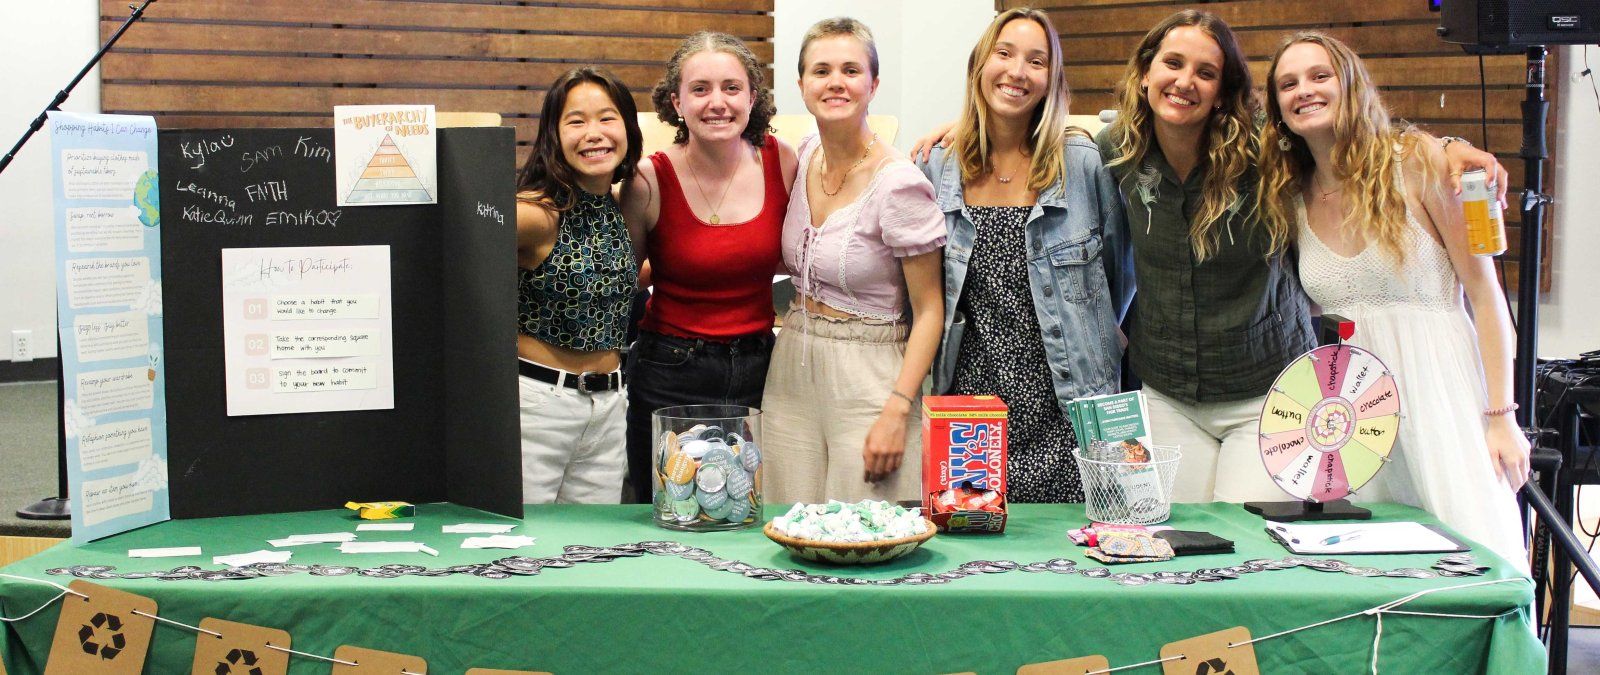 PLNU students smile for a photo at a recycling display